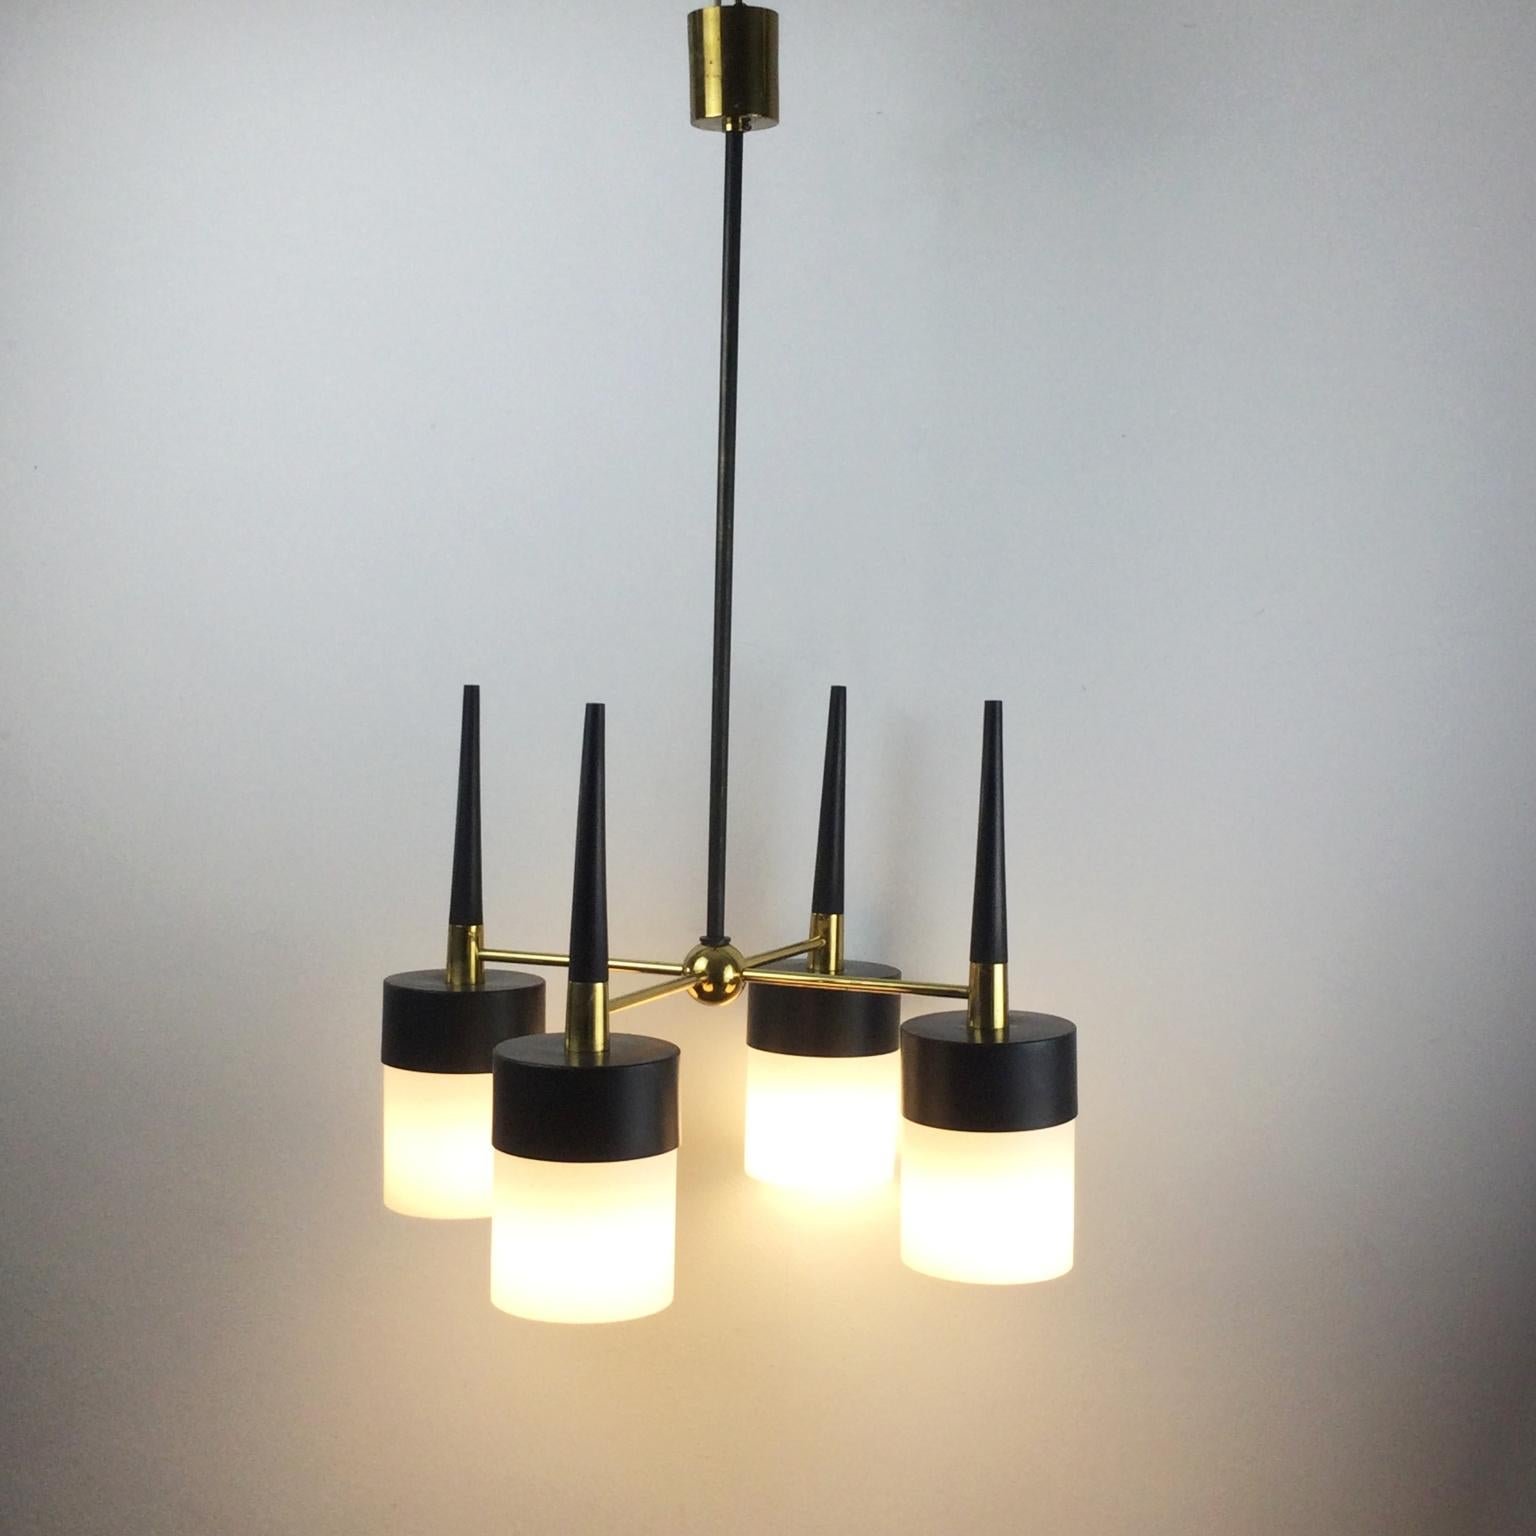 Mid-Century Modern 1950s Arlus Ceiling Light with Four Opalines Glass Shade and Brass Finish